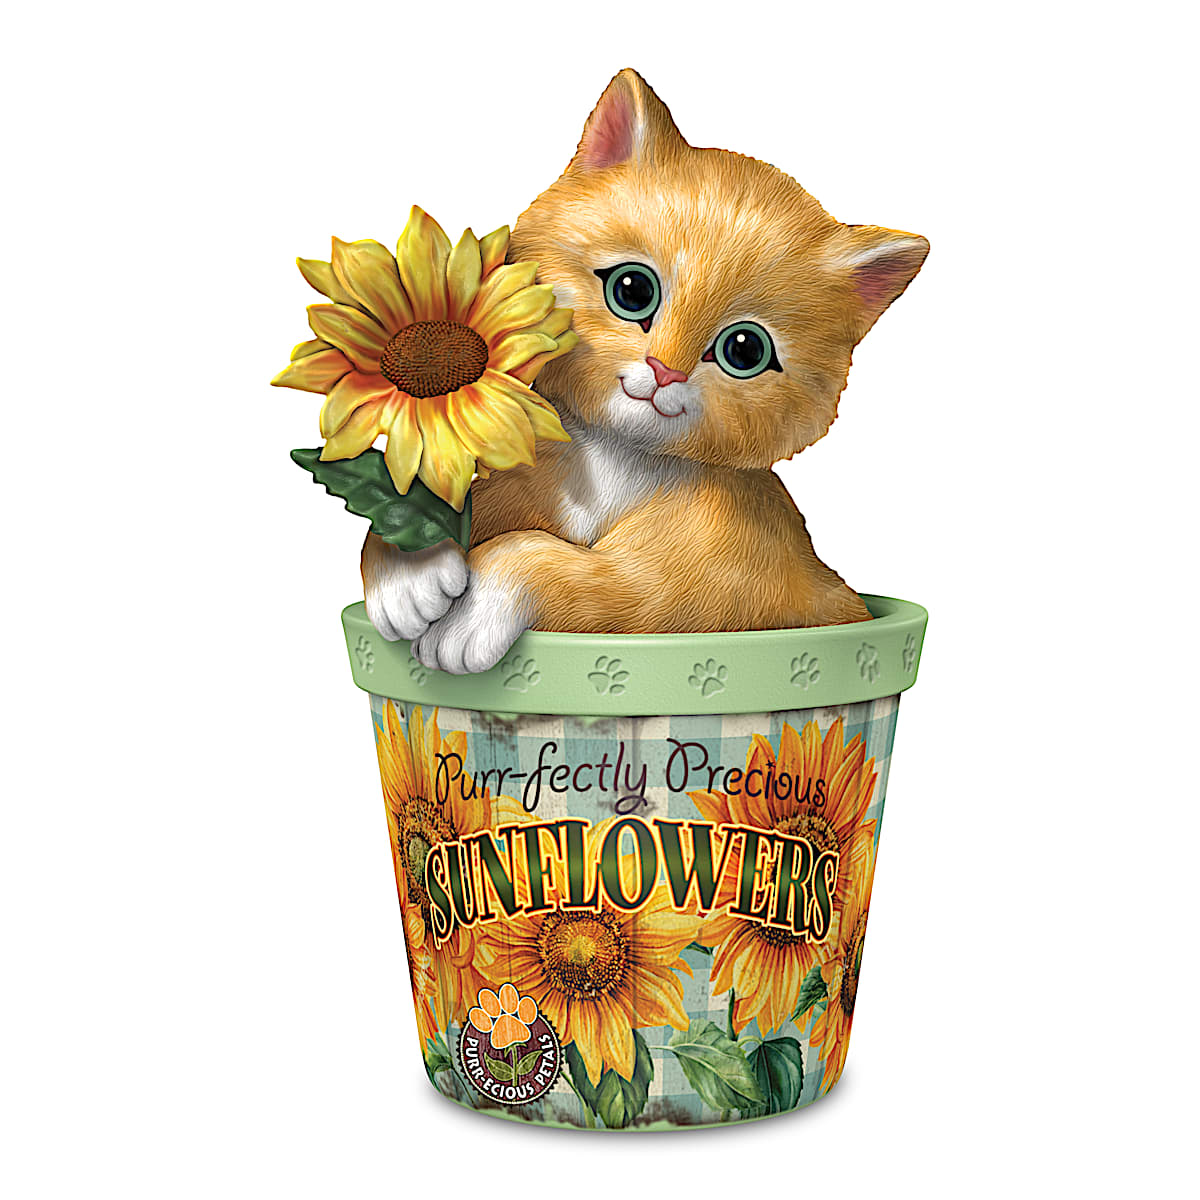 Purr-fectly Precious Sunflower Inspired By The Art Of Kayomi Harai